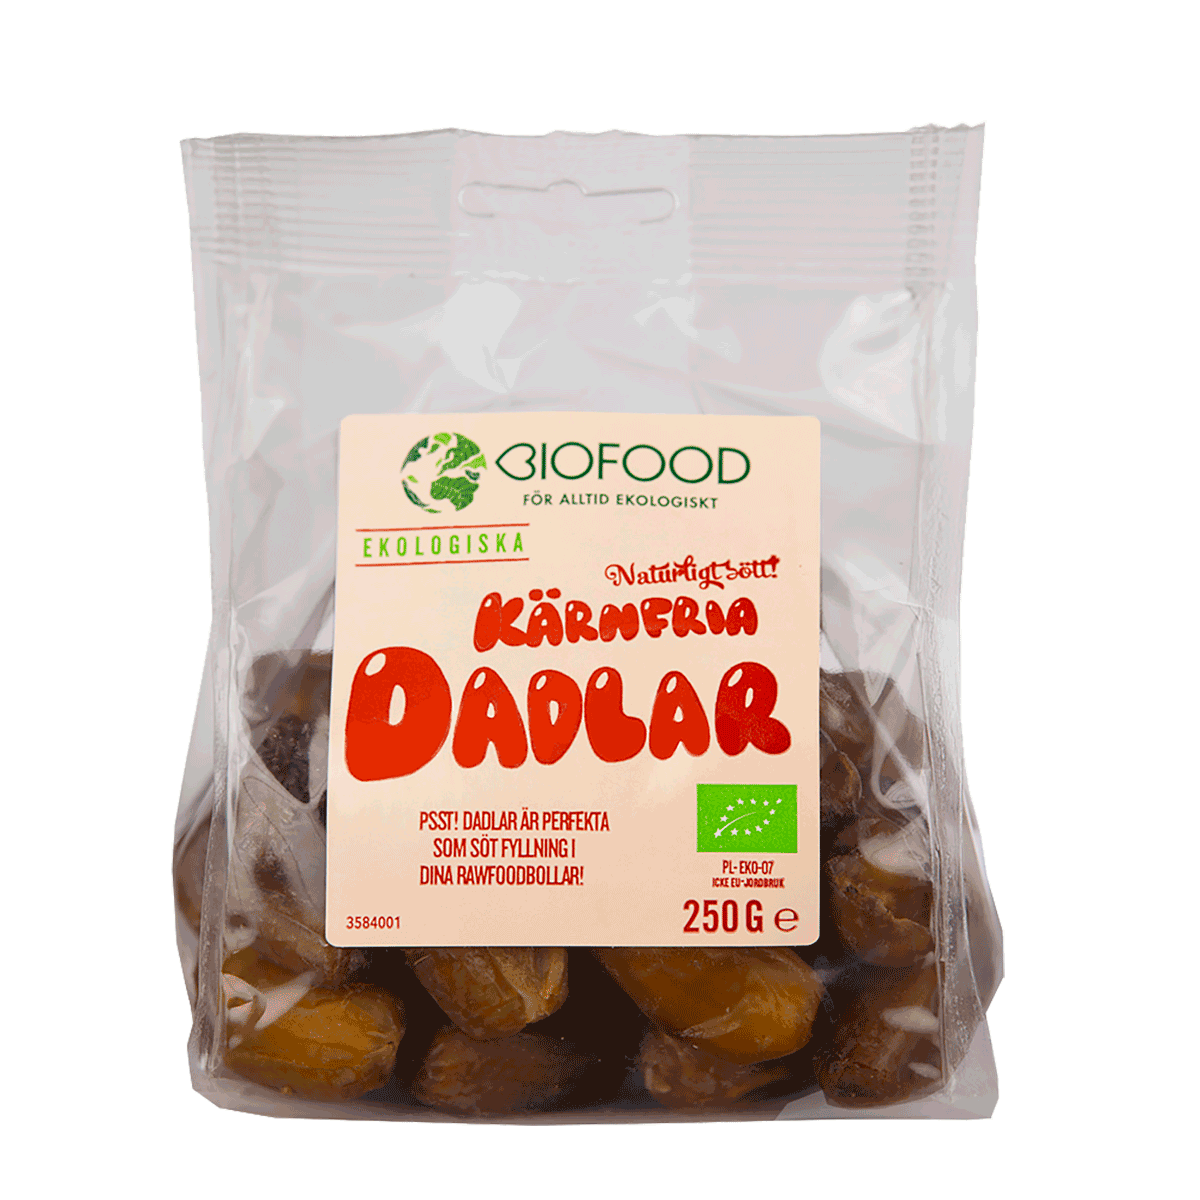 Dates from Biofood